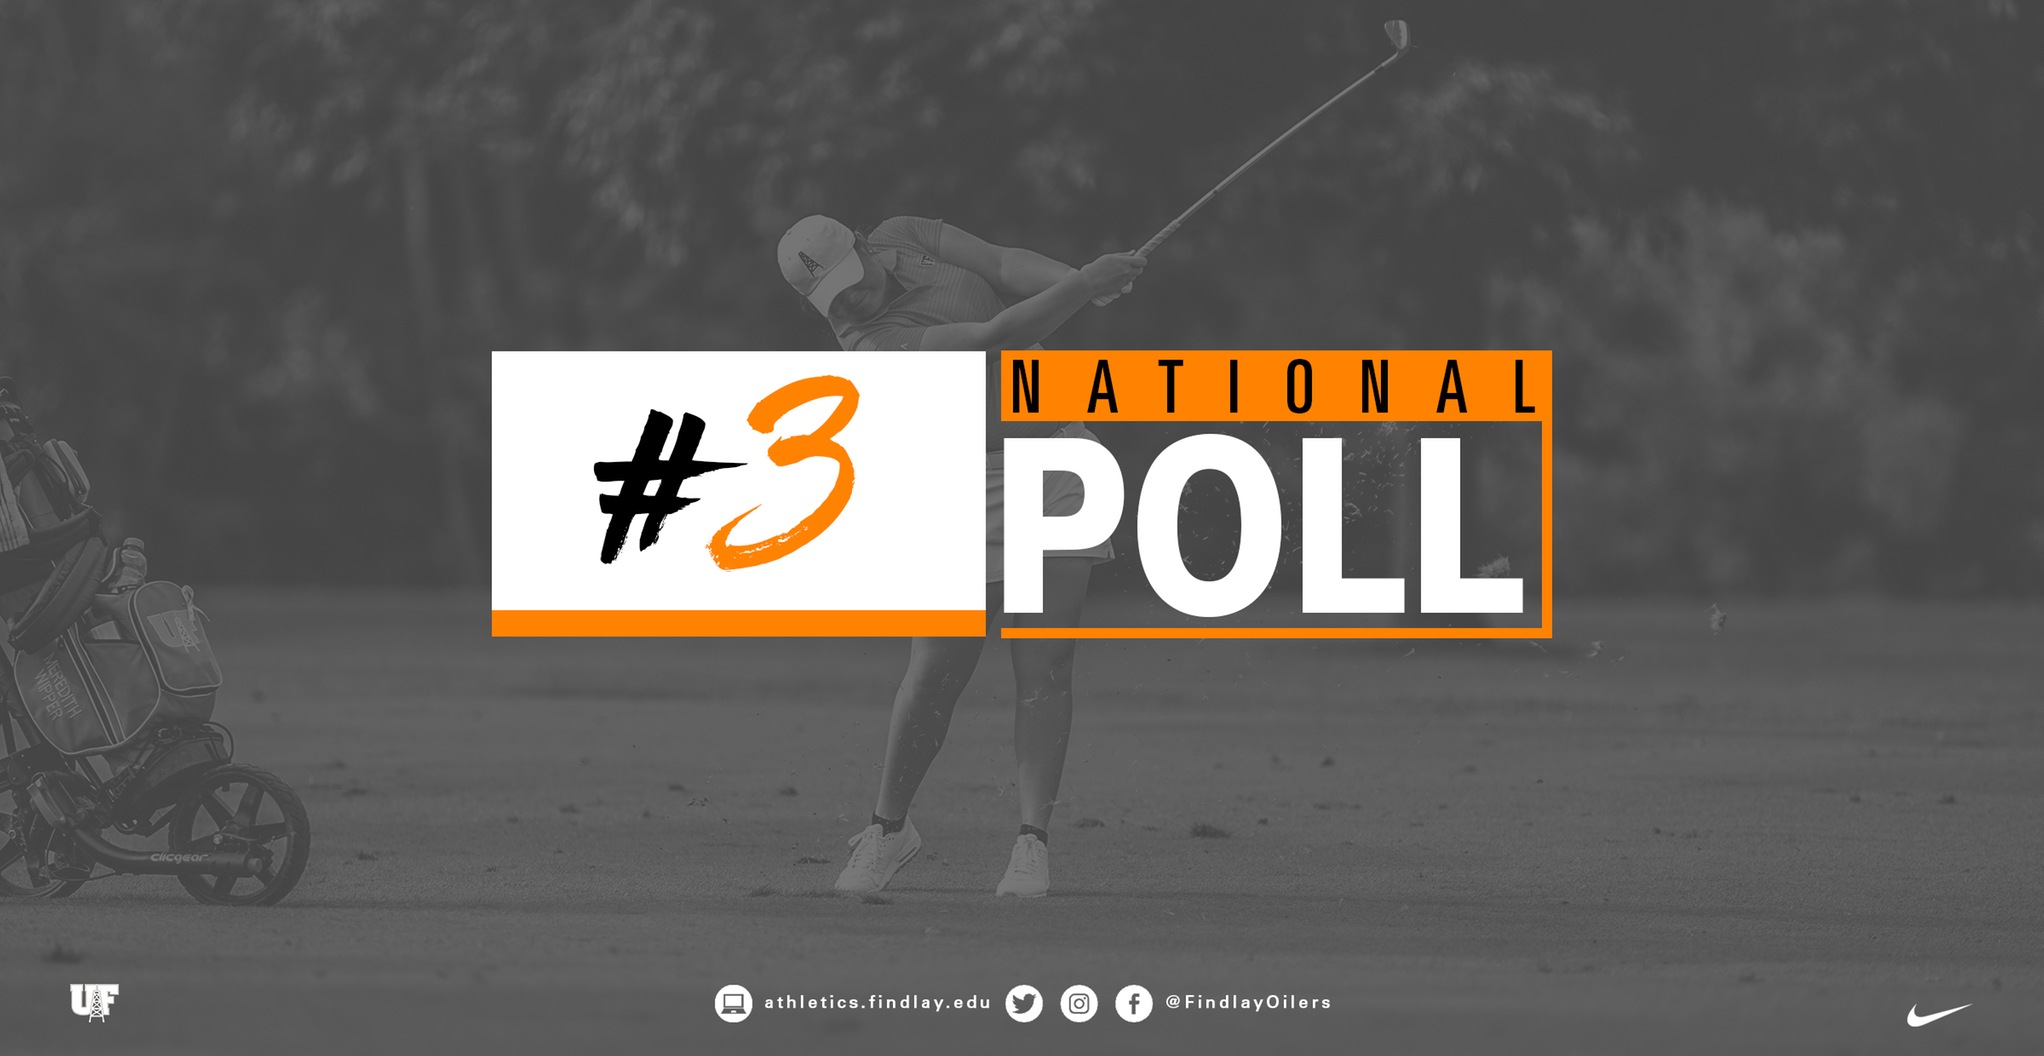 Oilers Ranked 3rd in National Poll